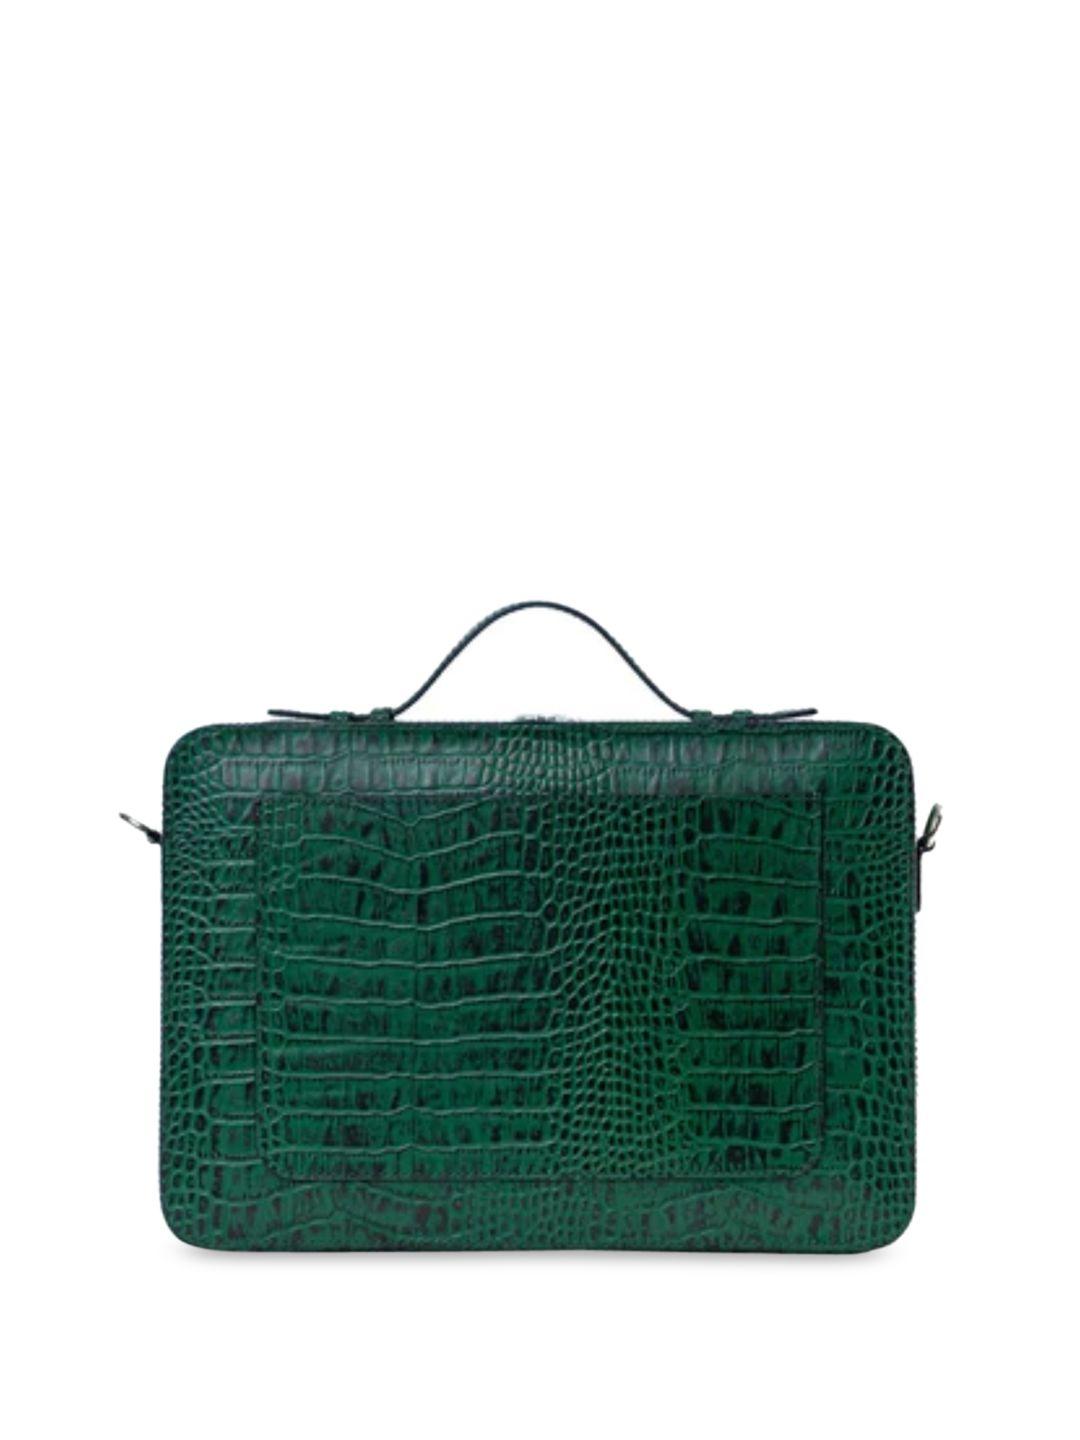 mistry animal textured leather structured sling bag